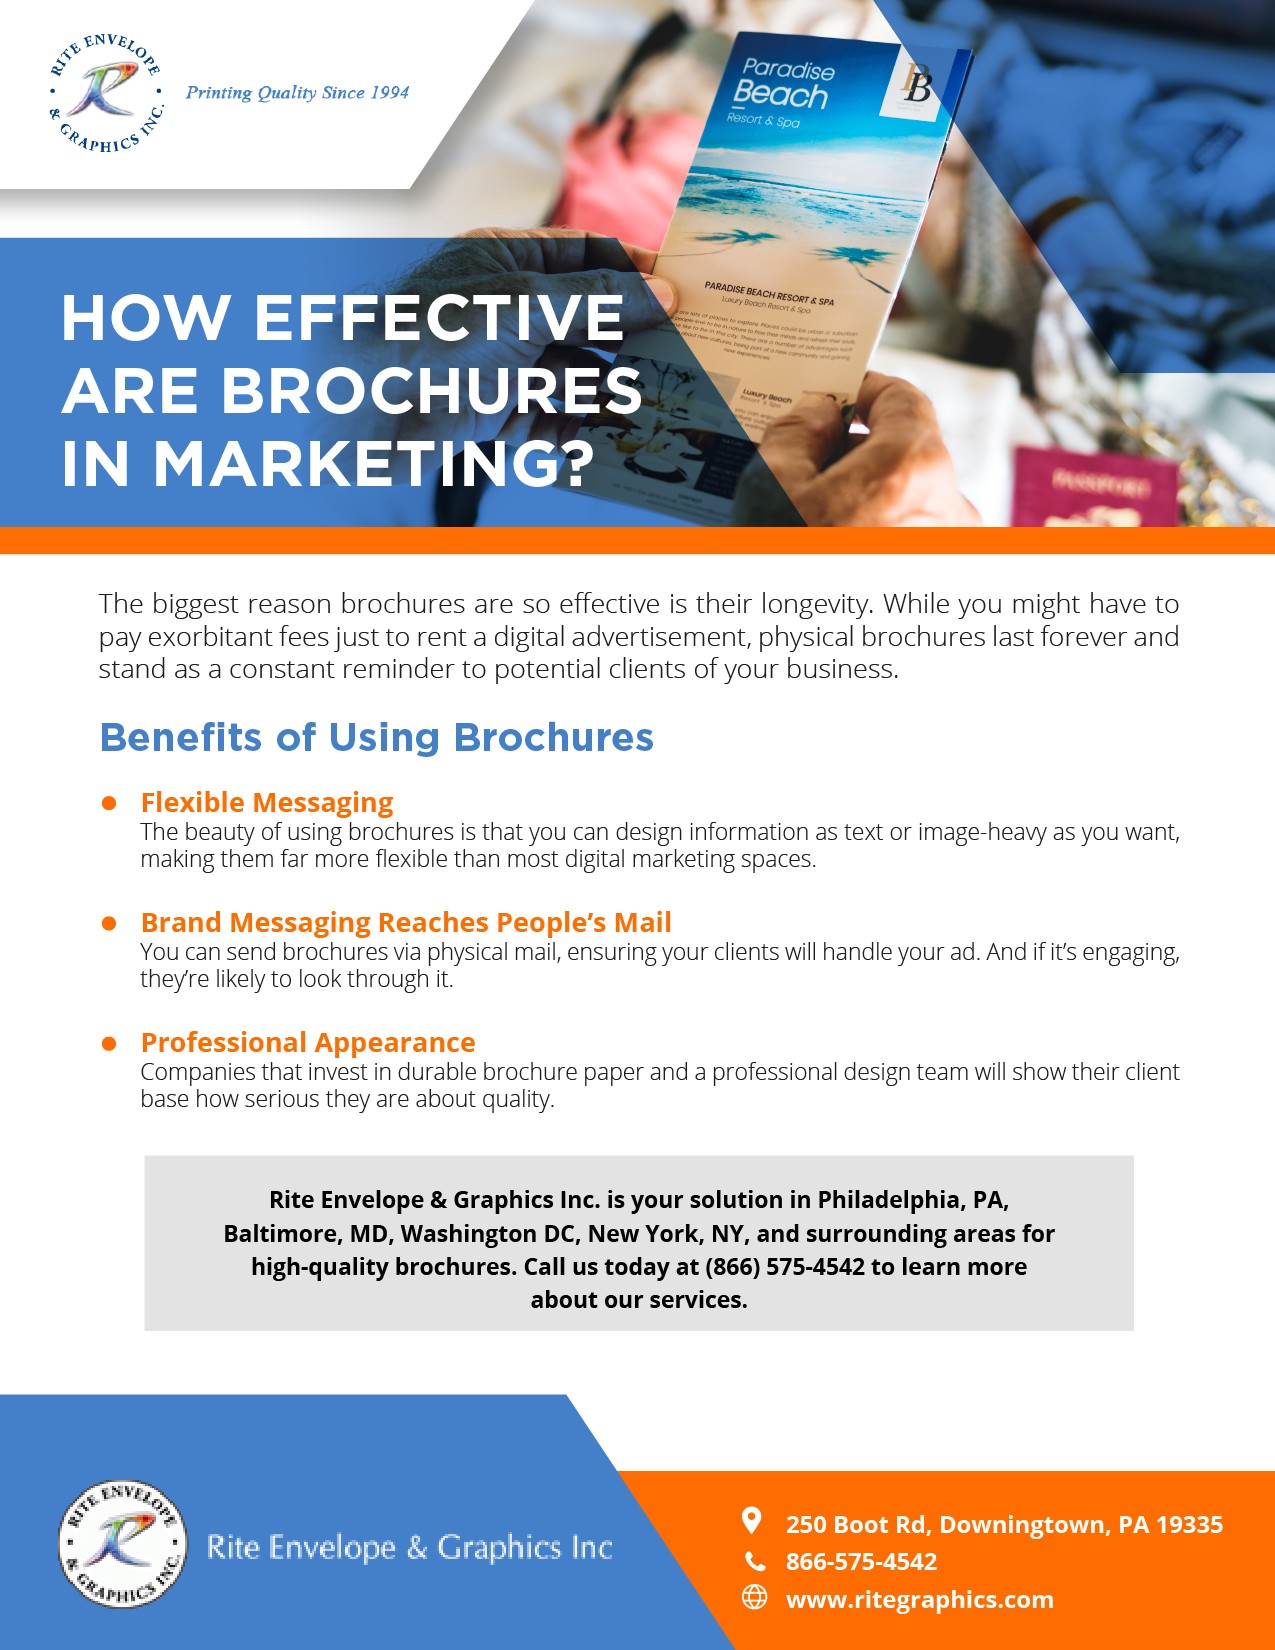 How to Market Your Business Using Brochures